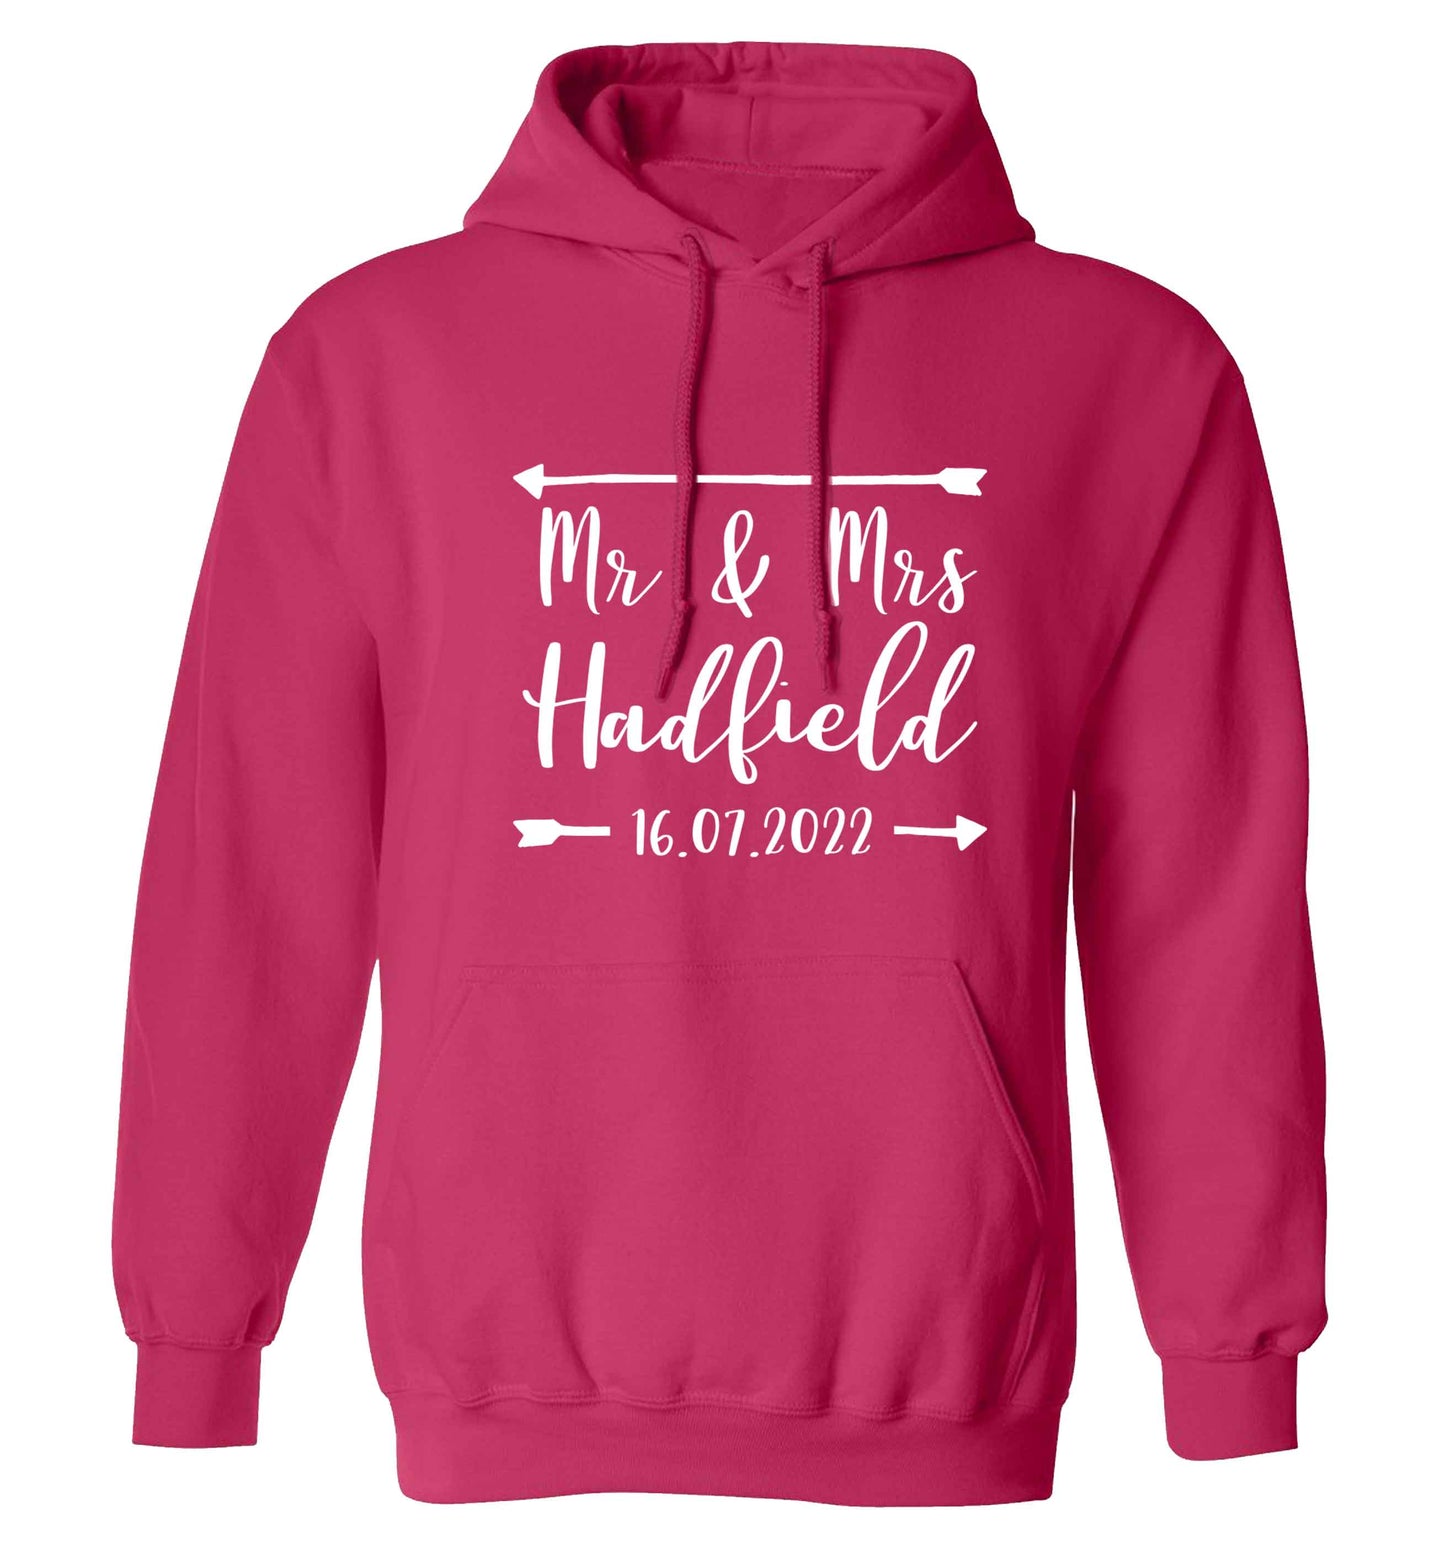 Personalised Mr and Mrs wedding date! Ideal wedding favours! adults unisex pink hoodie 2XL